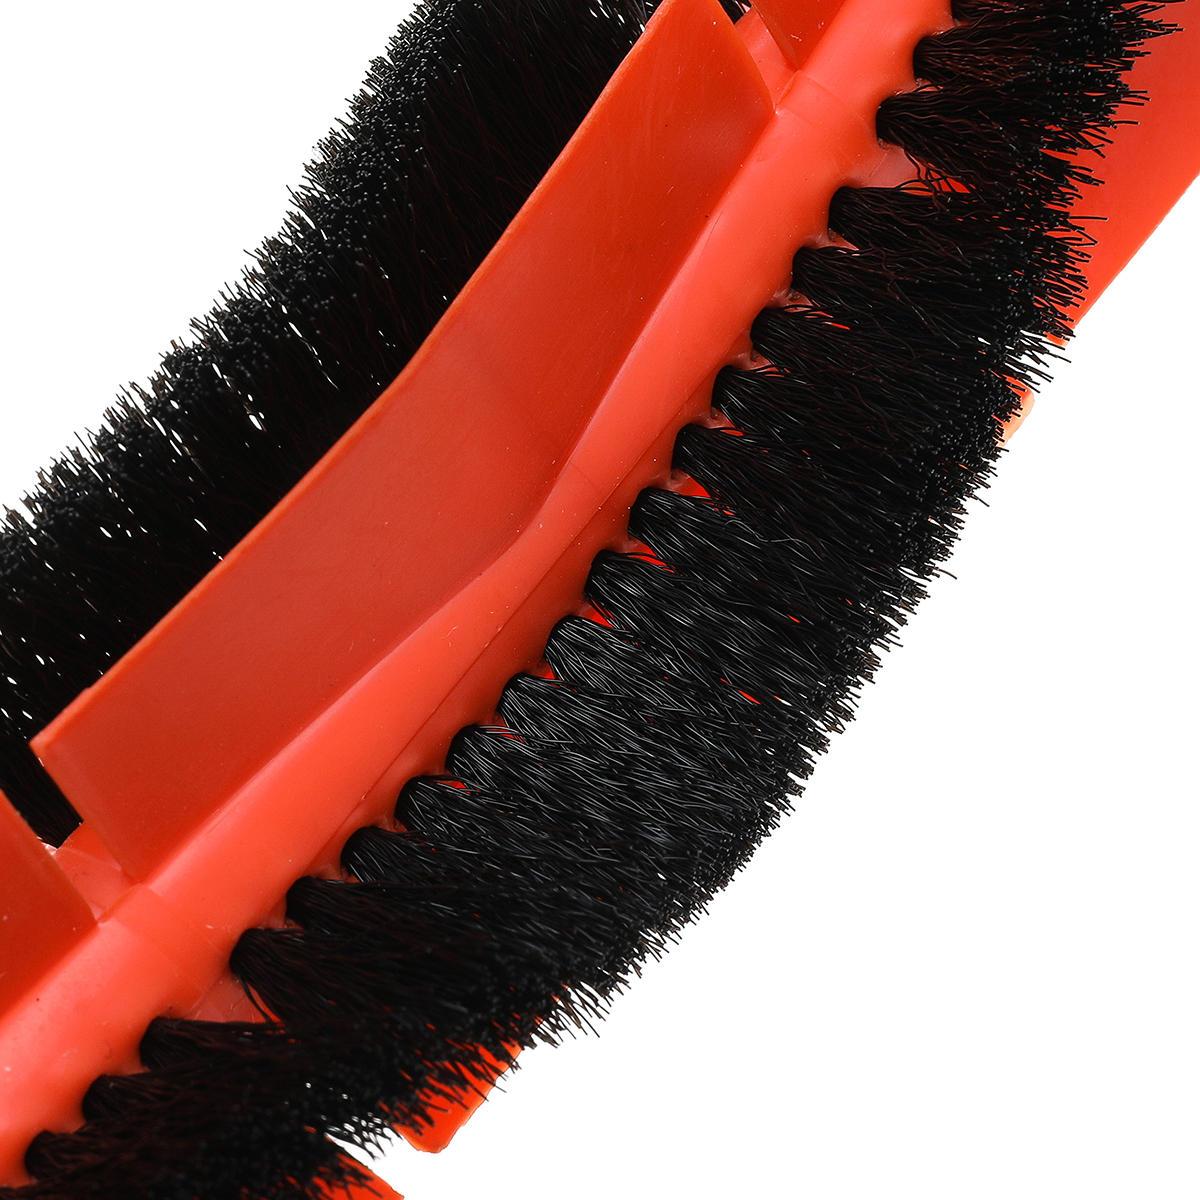 8pcs Replacements for Xiaomi Vacuum Cleaner Parts Accessories 2*Side brushes 4*Filters 1*Main Brushes 1*White Brush